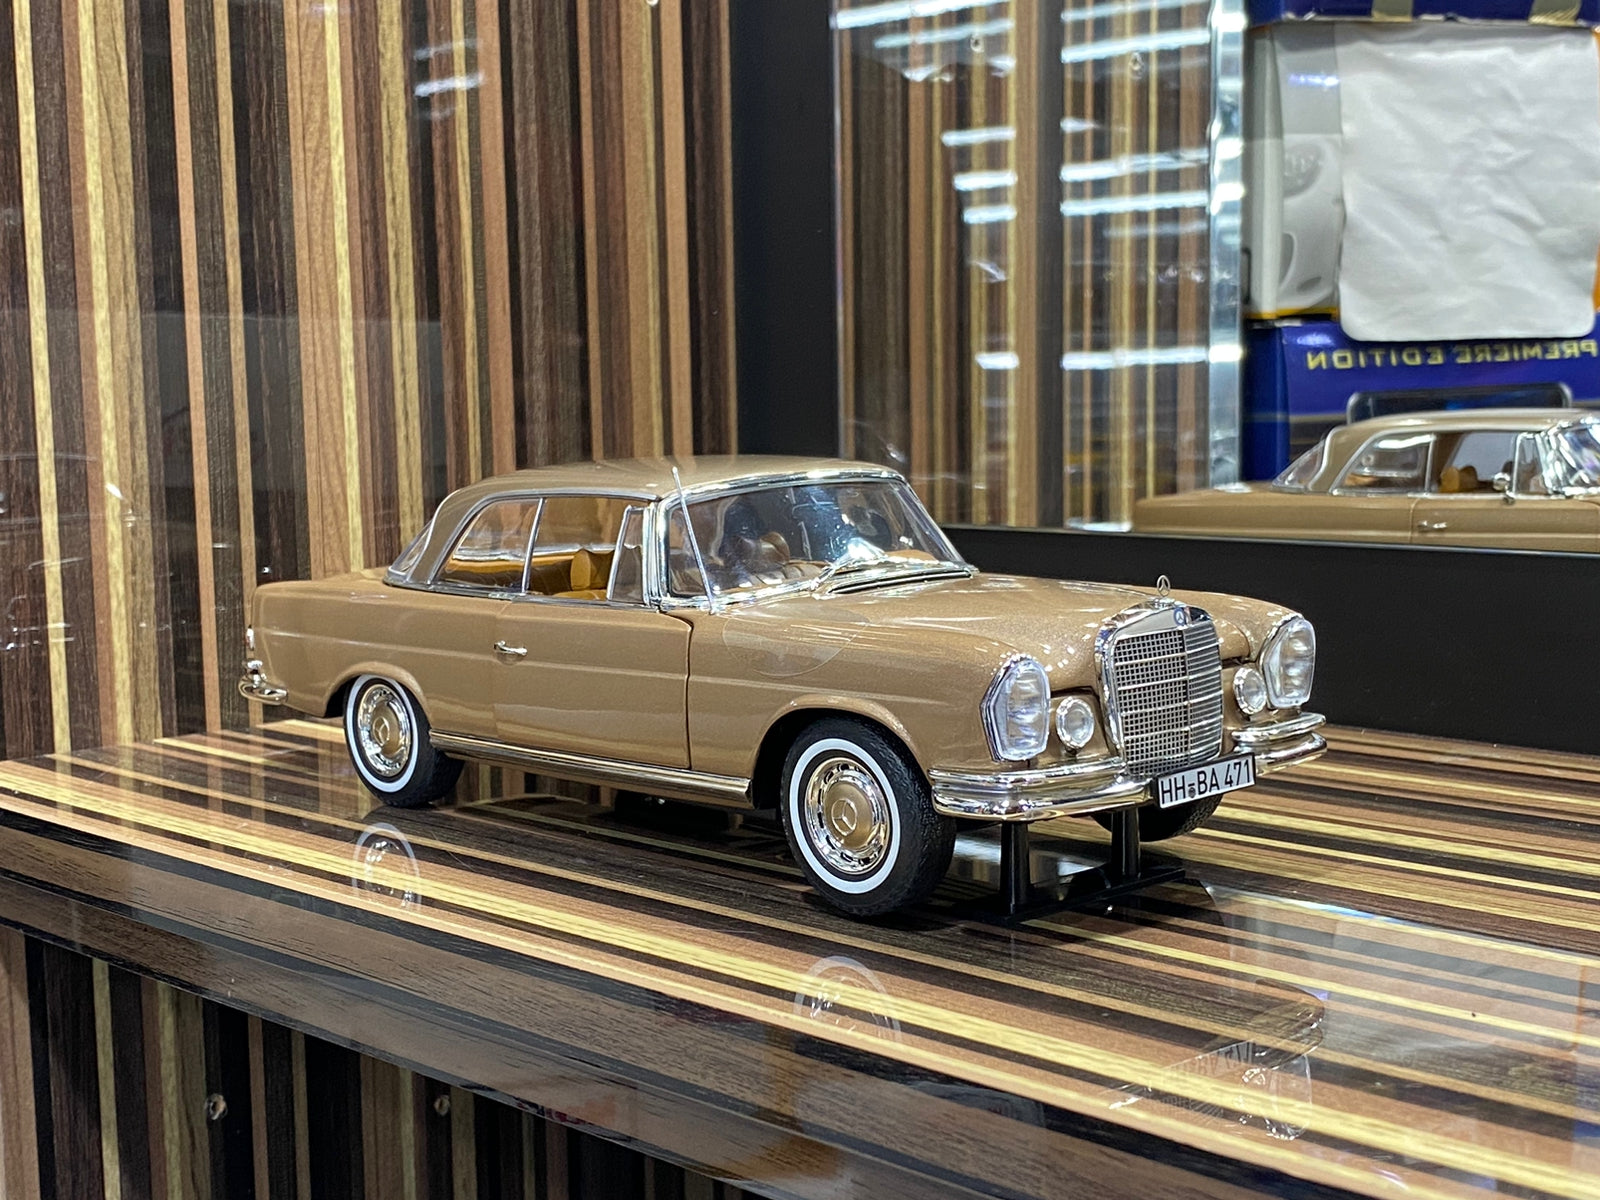 Norev 1:18 Mercedes-Benz 250 SE Coupe (W111) year 1969 gold